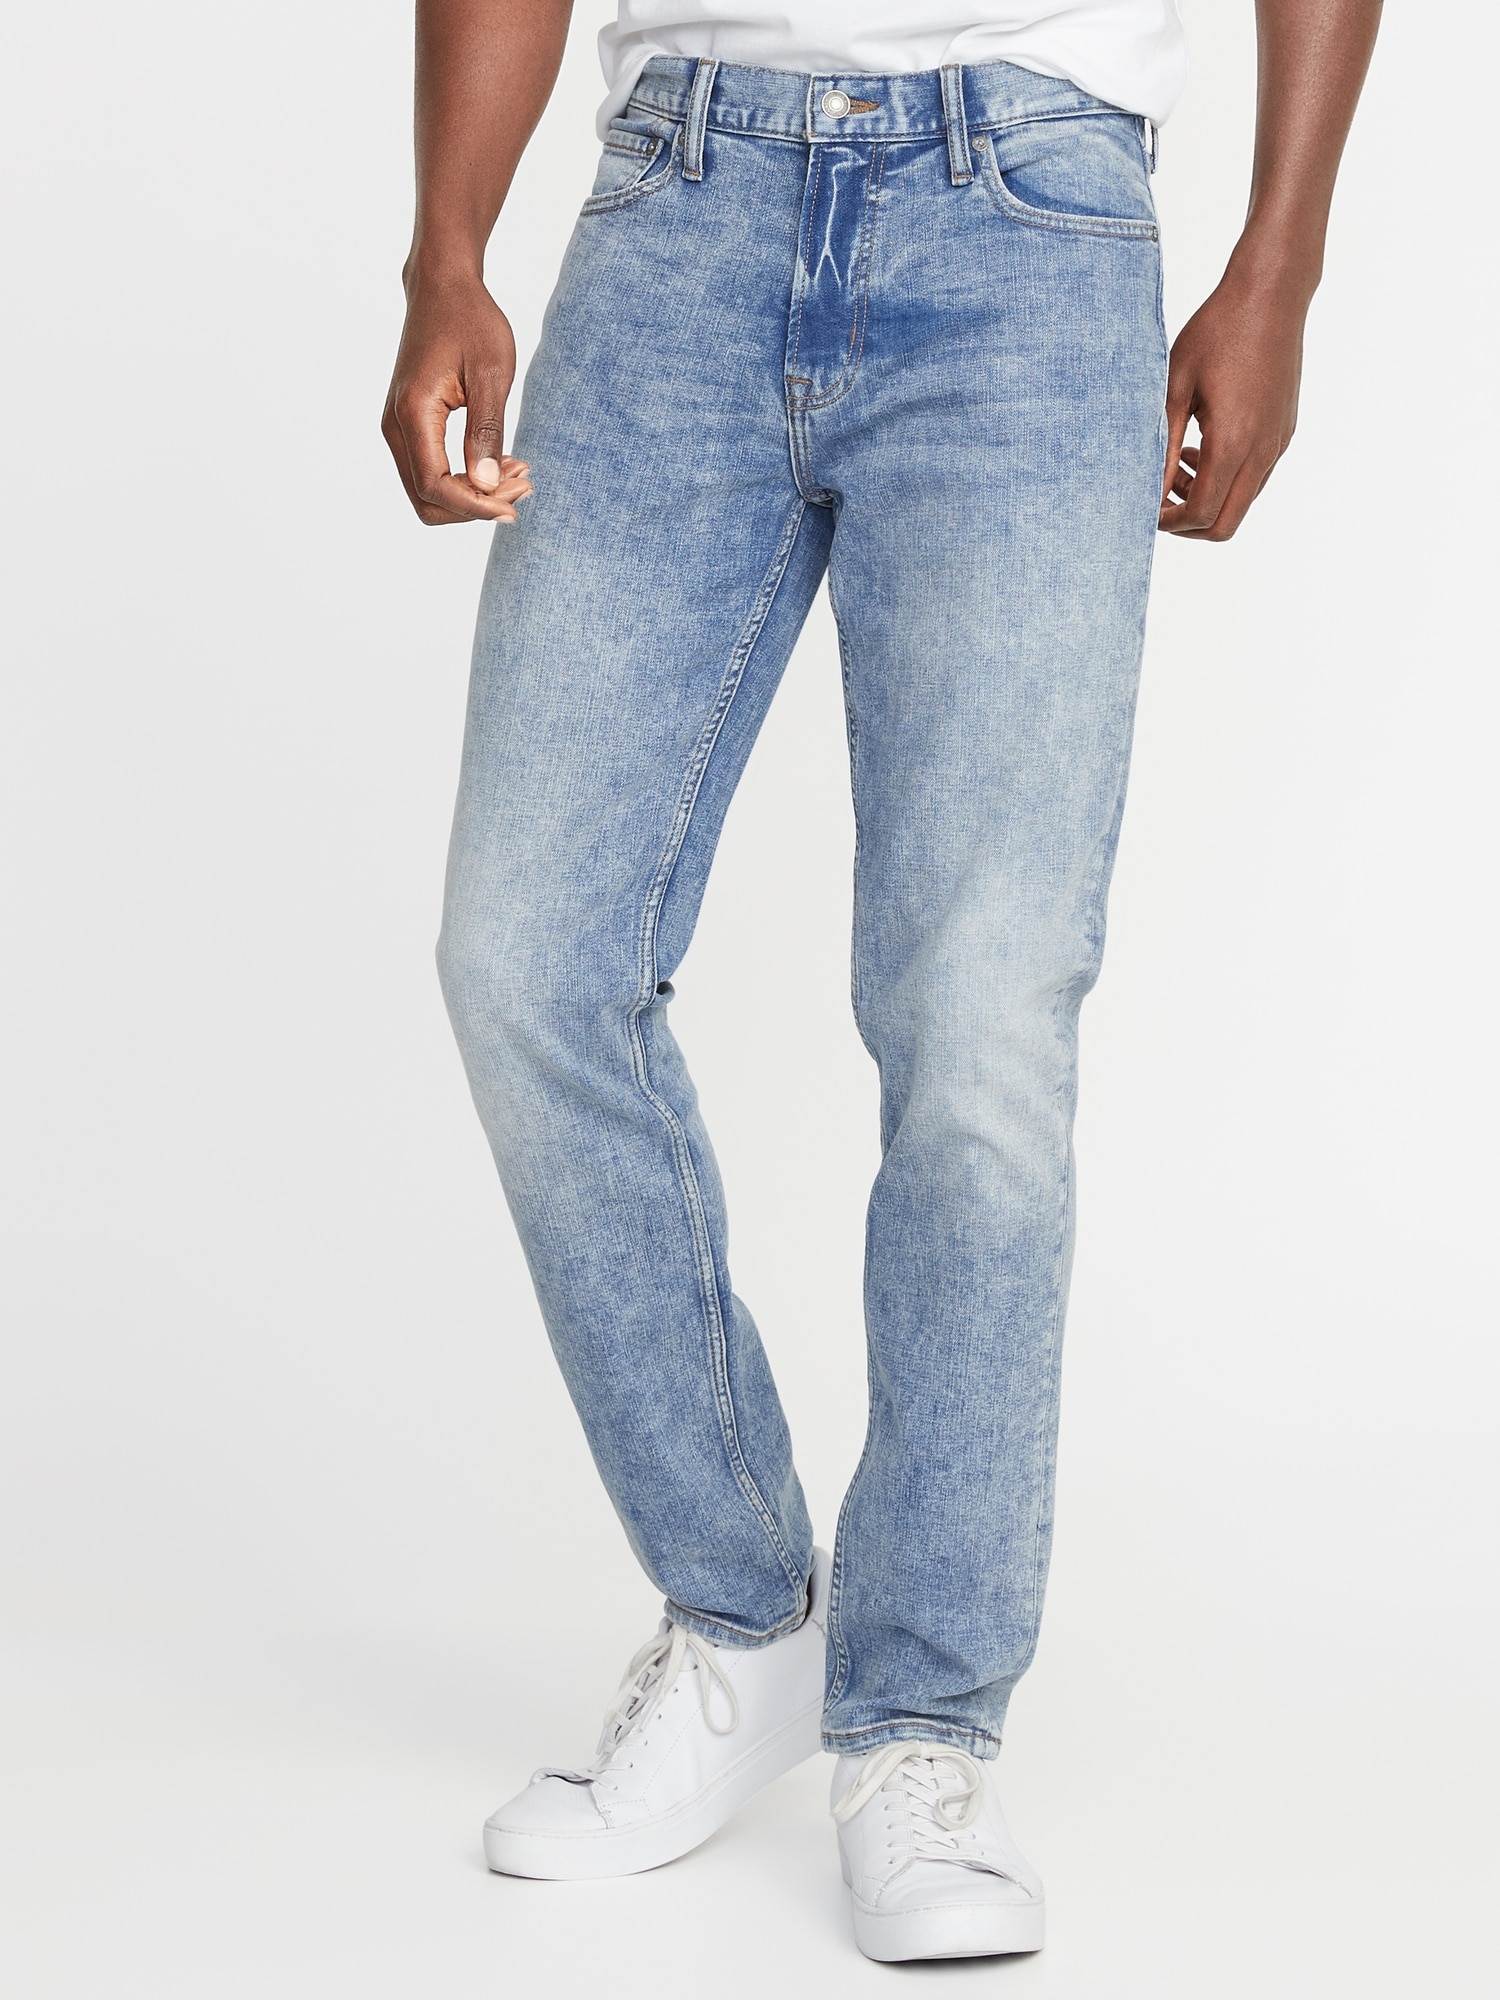 Relaxed Slim Built-In Flex All-Temp Jeans For Men | Old Navy